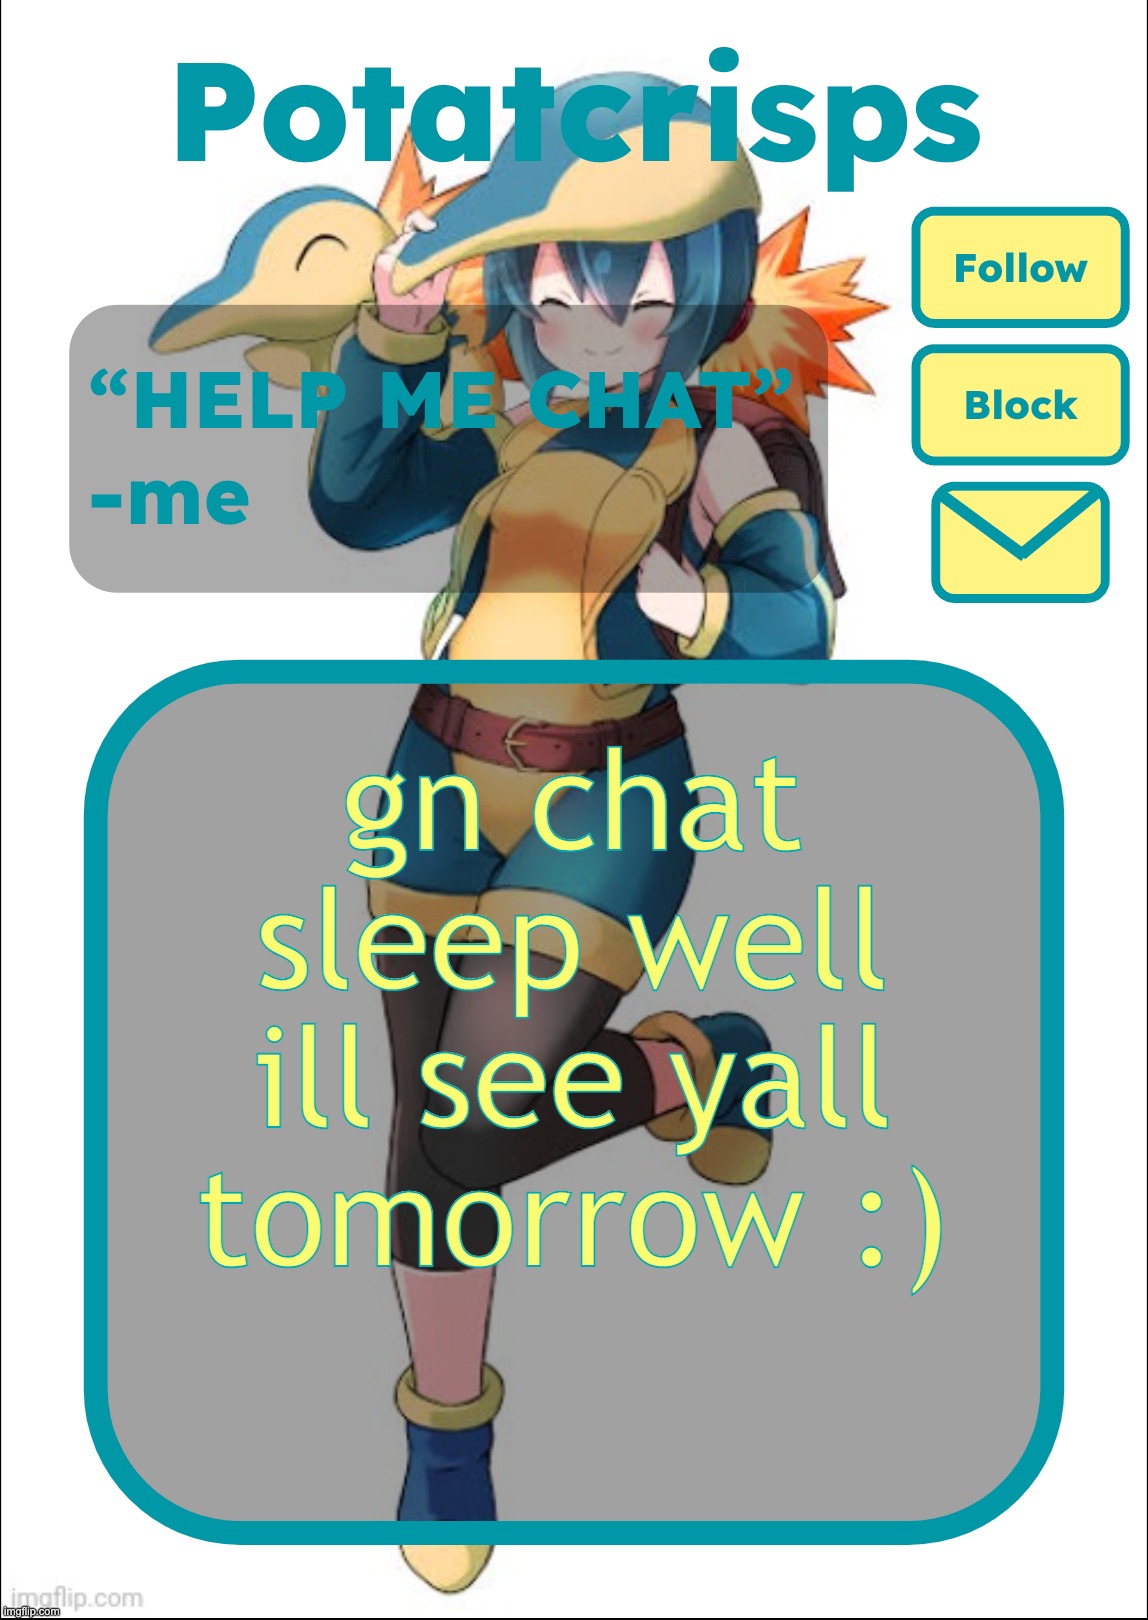 LY CHAT <3 | gn chat sleep well ill see yall tomorrow :) | image tagged in potatcrisps announcement temp | made w/ Imgflip meme maker